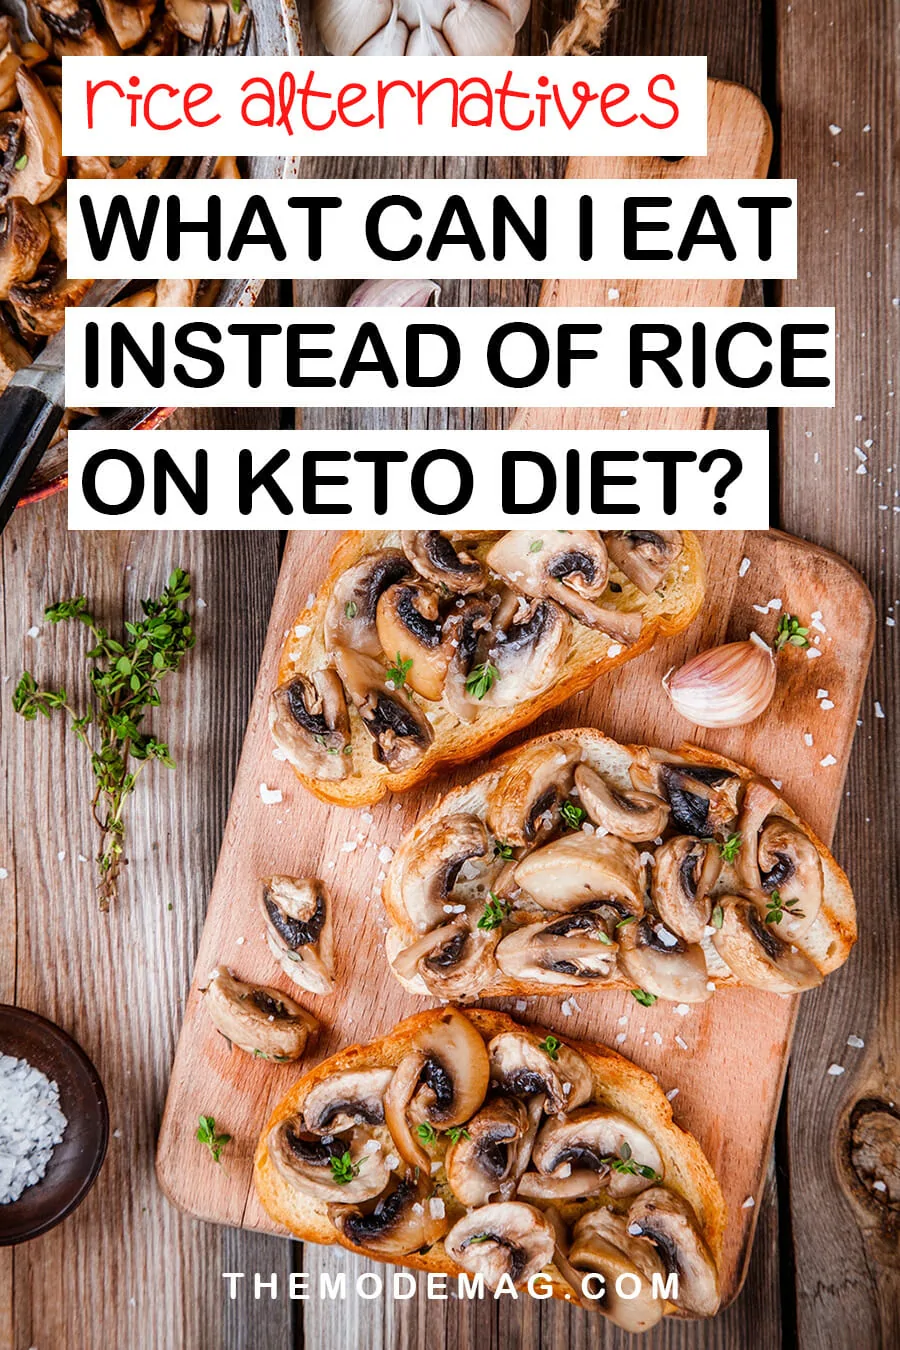 Rice Alternatives: What Can I Eat Instead Of Rice On Keto Diet?